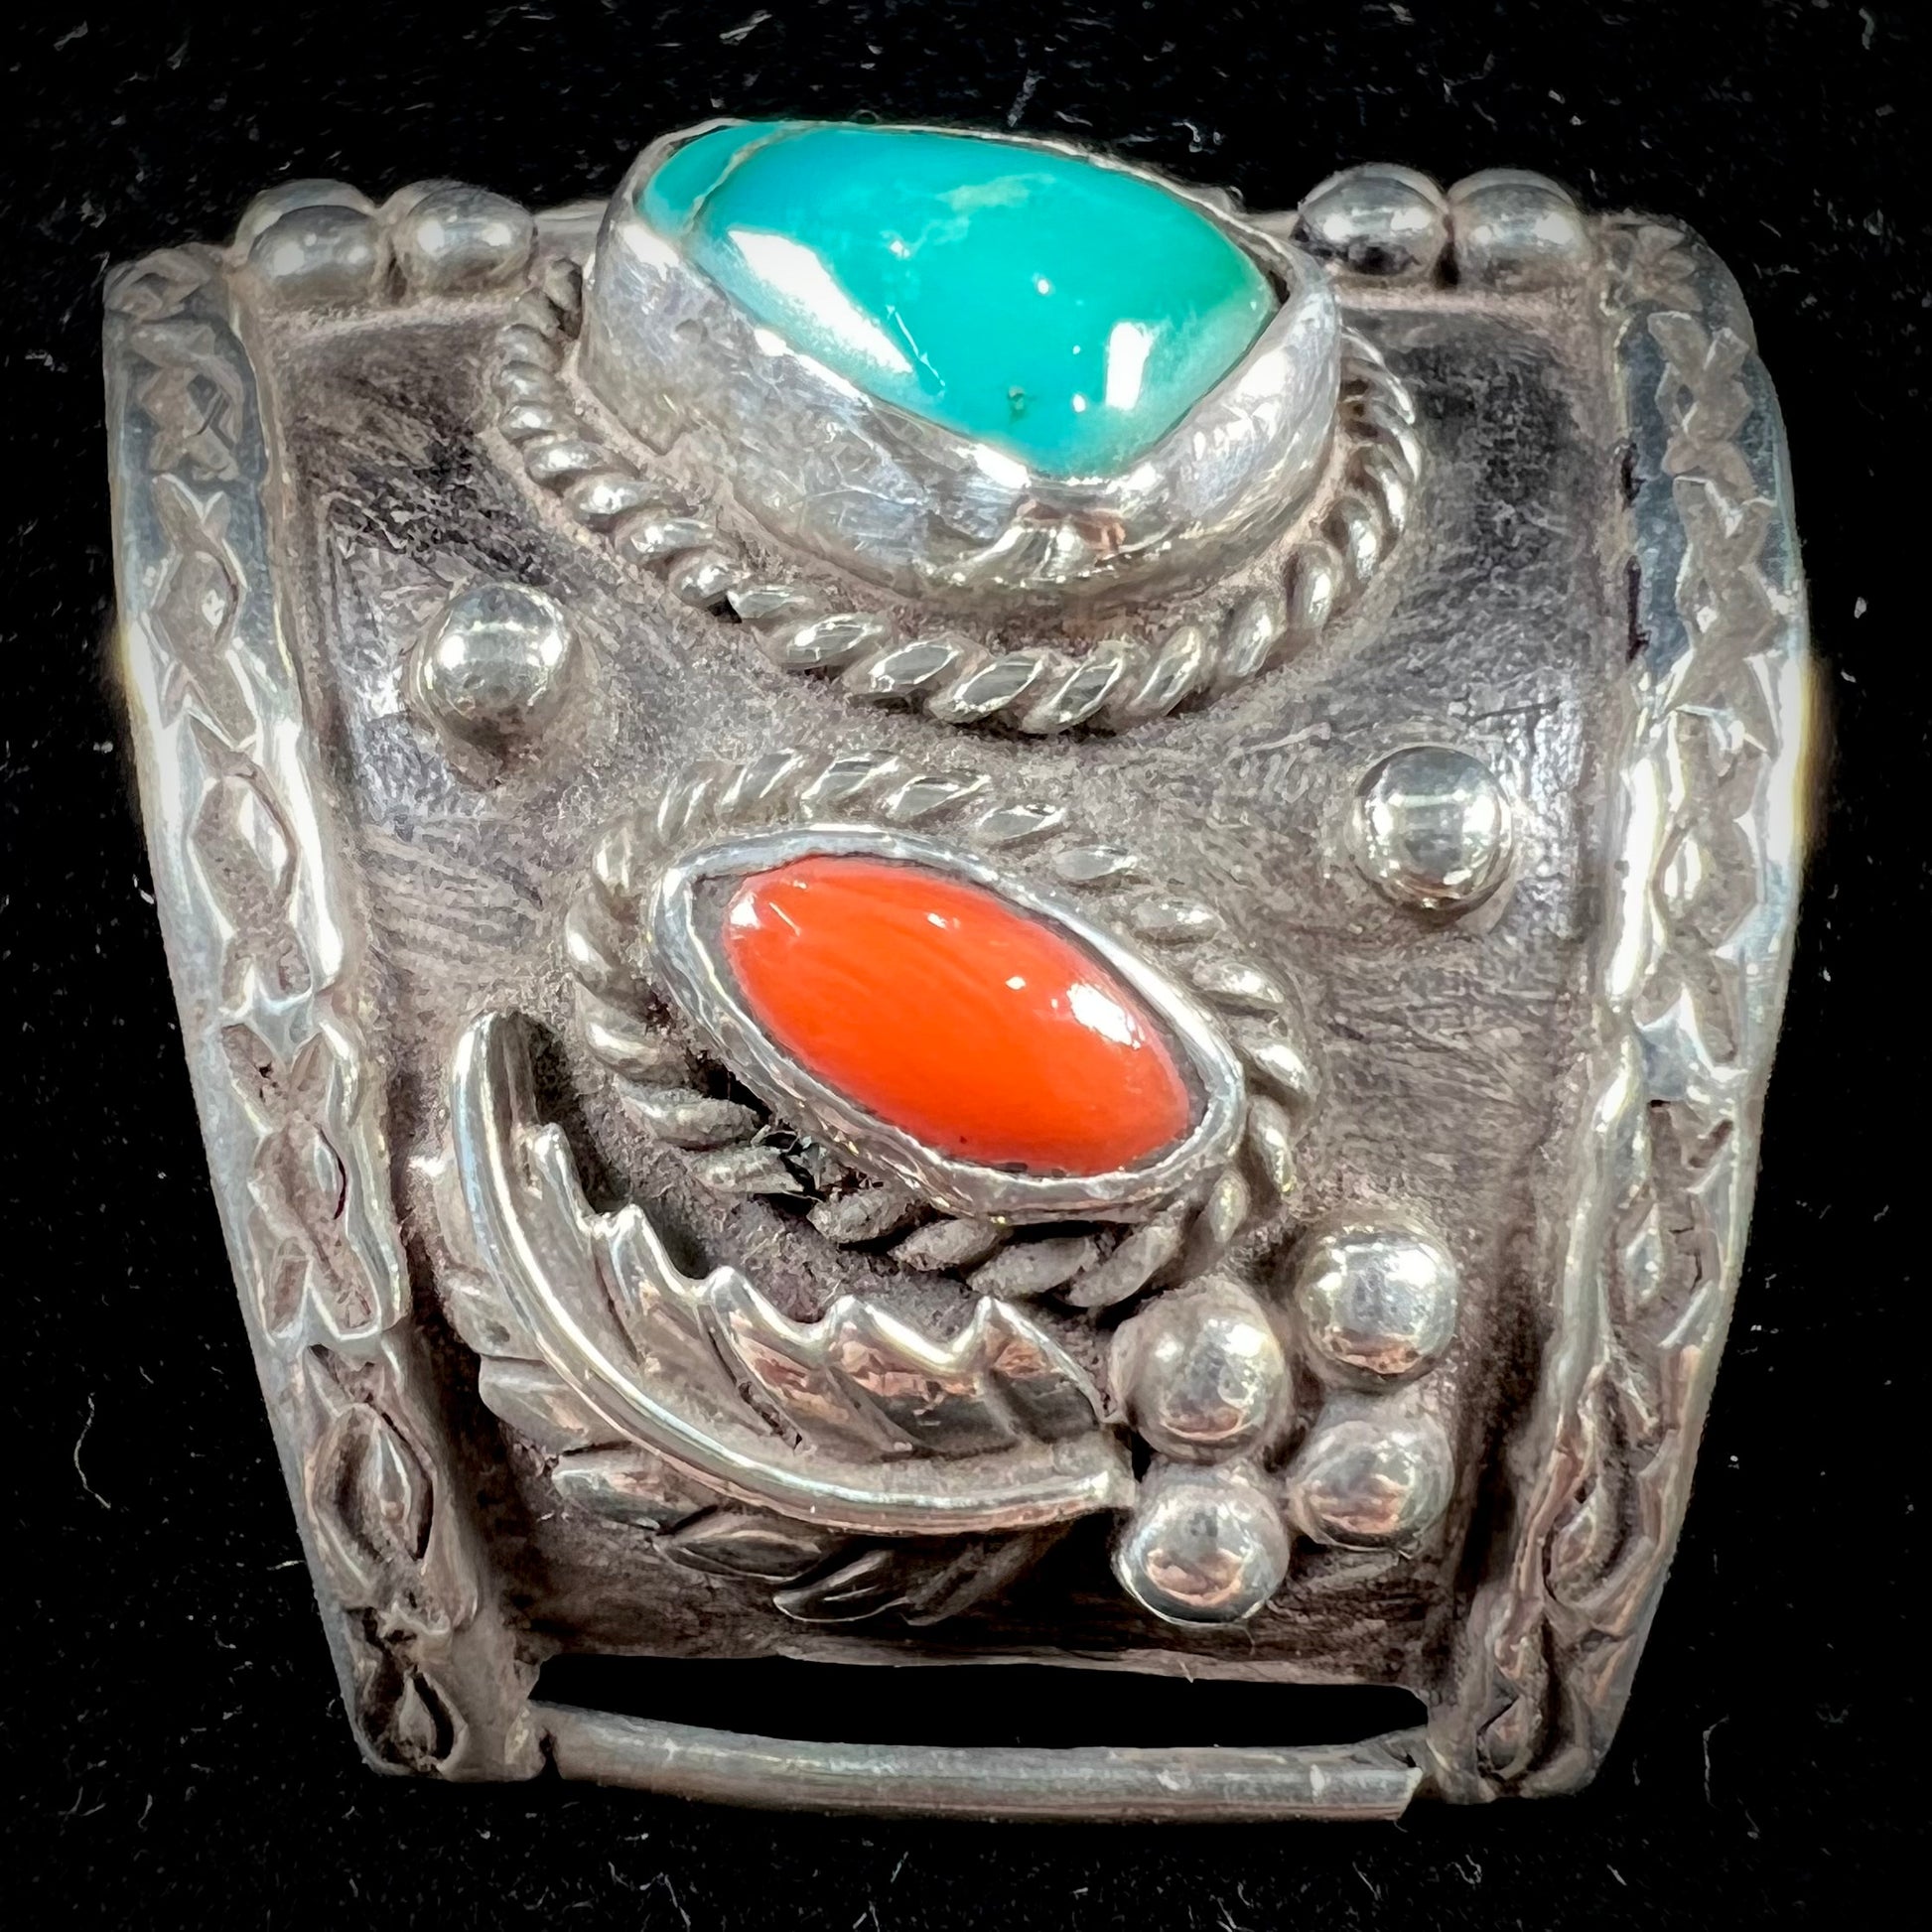 A pair of Navajo made sterling silver watch cuffs set with turquoise and coral stones.